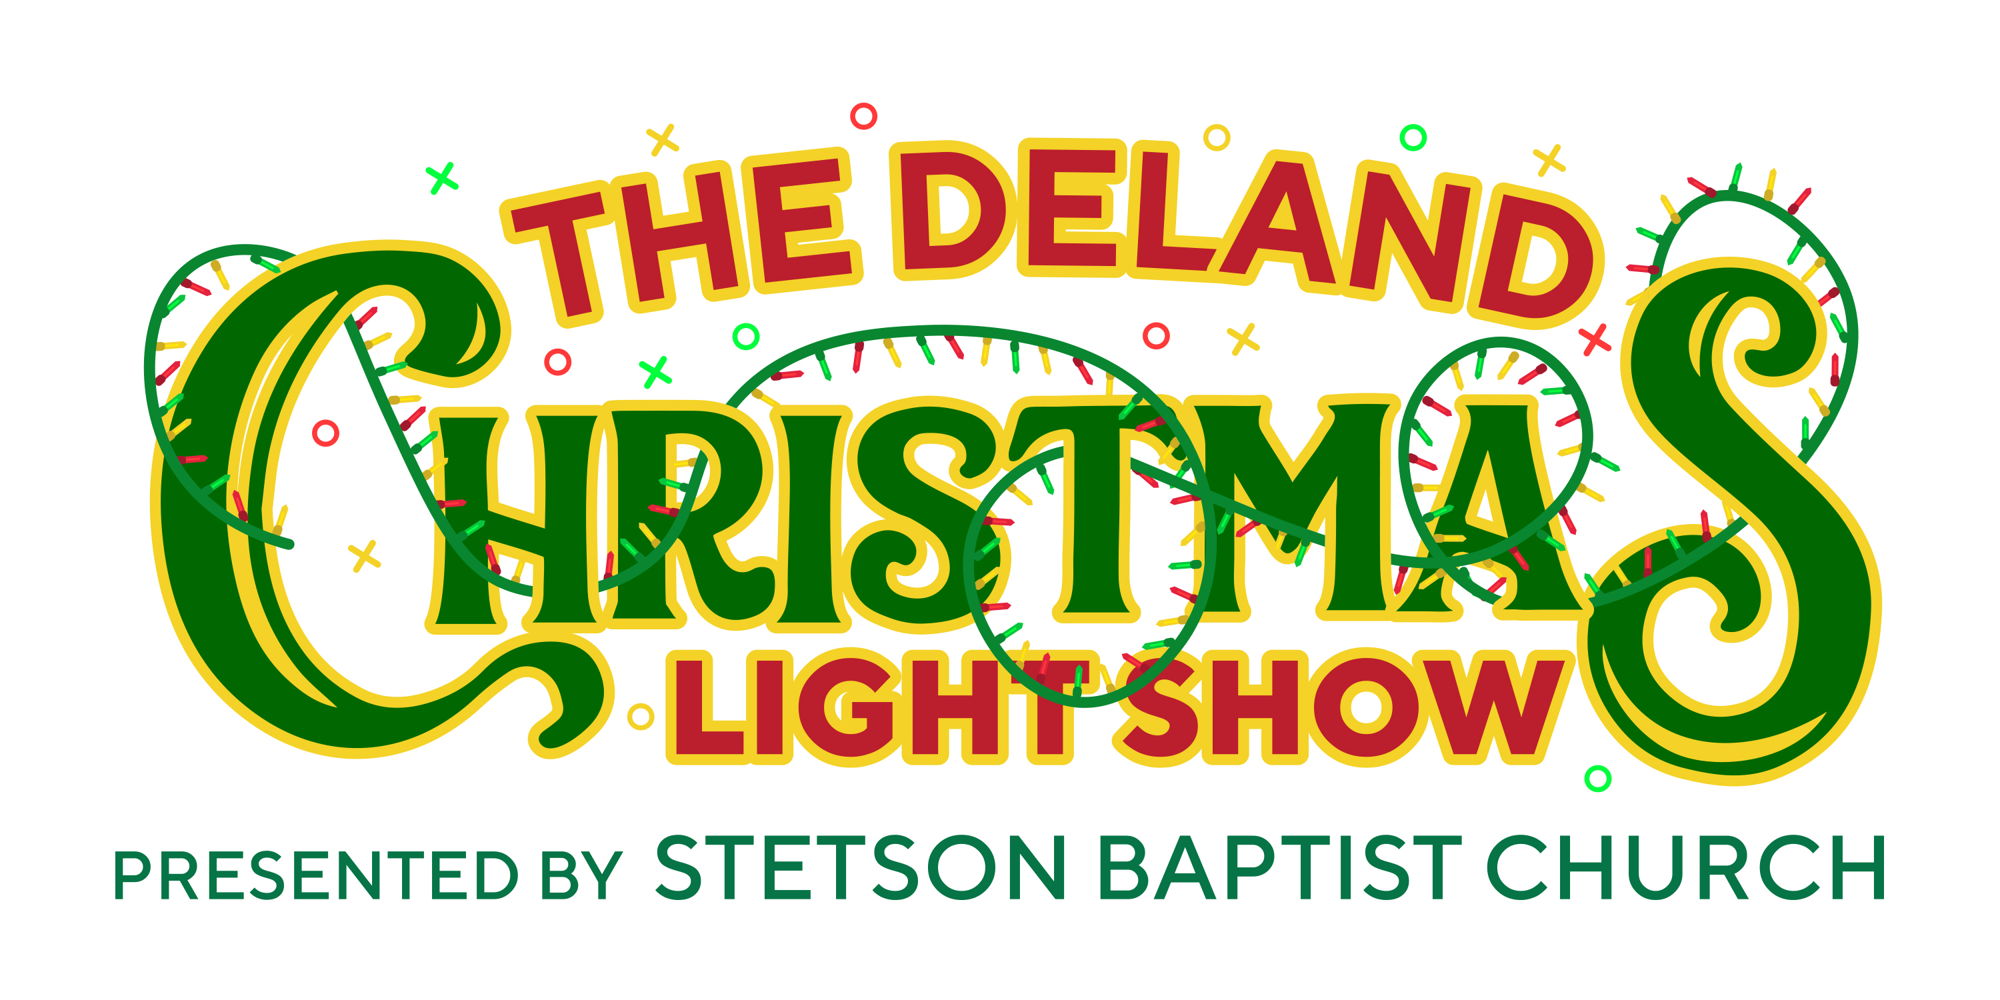 The DeLand Christmas Light Show promotional image